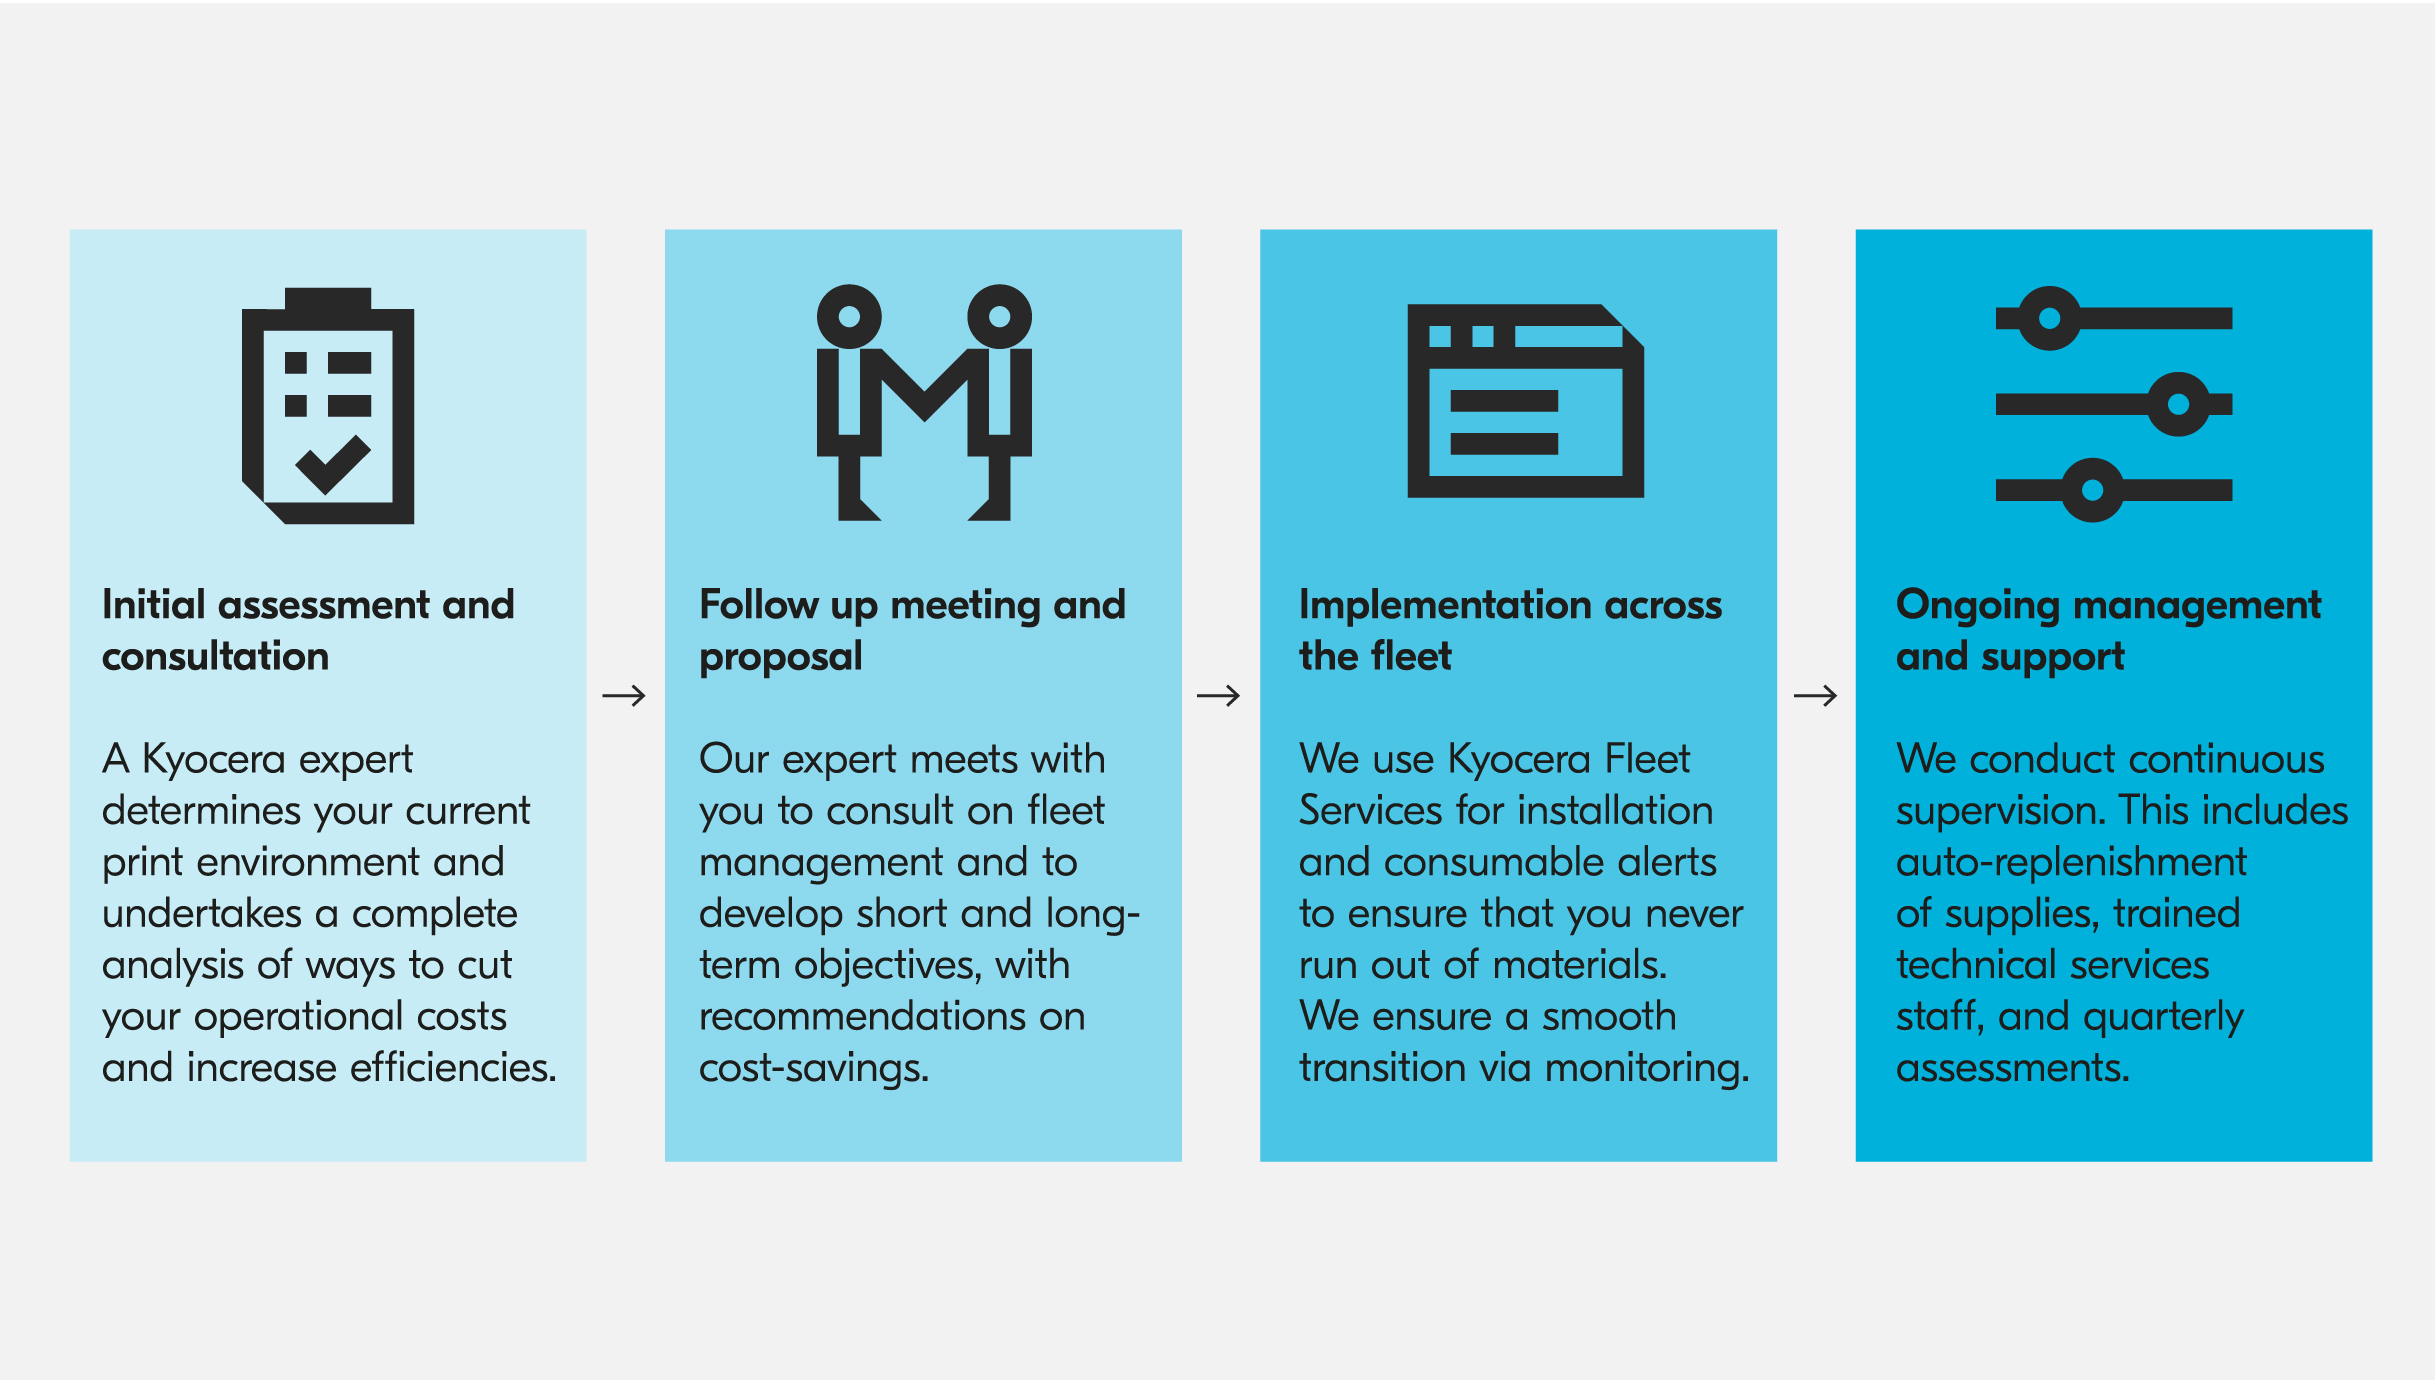 The four steps of Managed Print Services